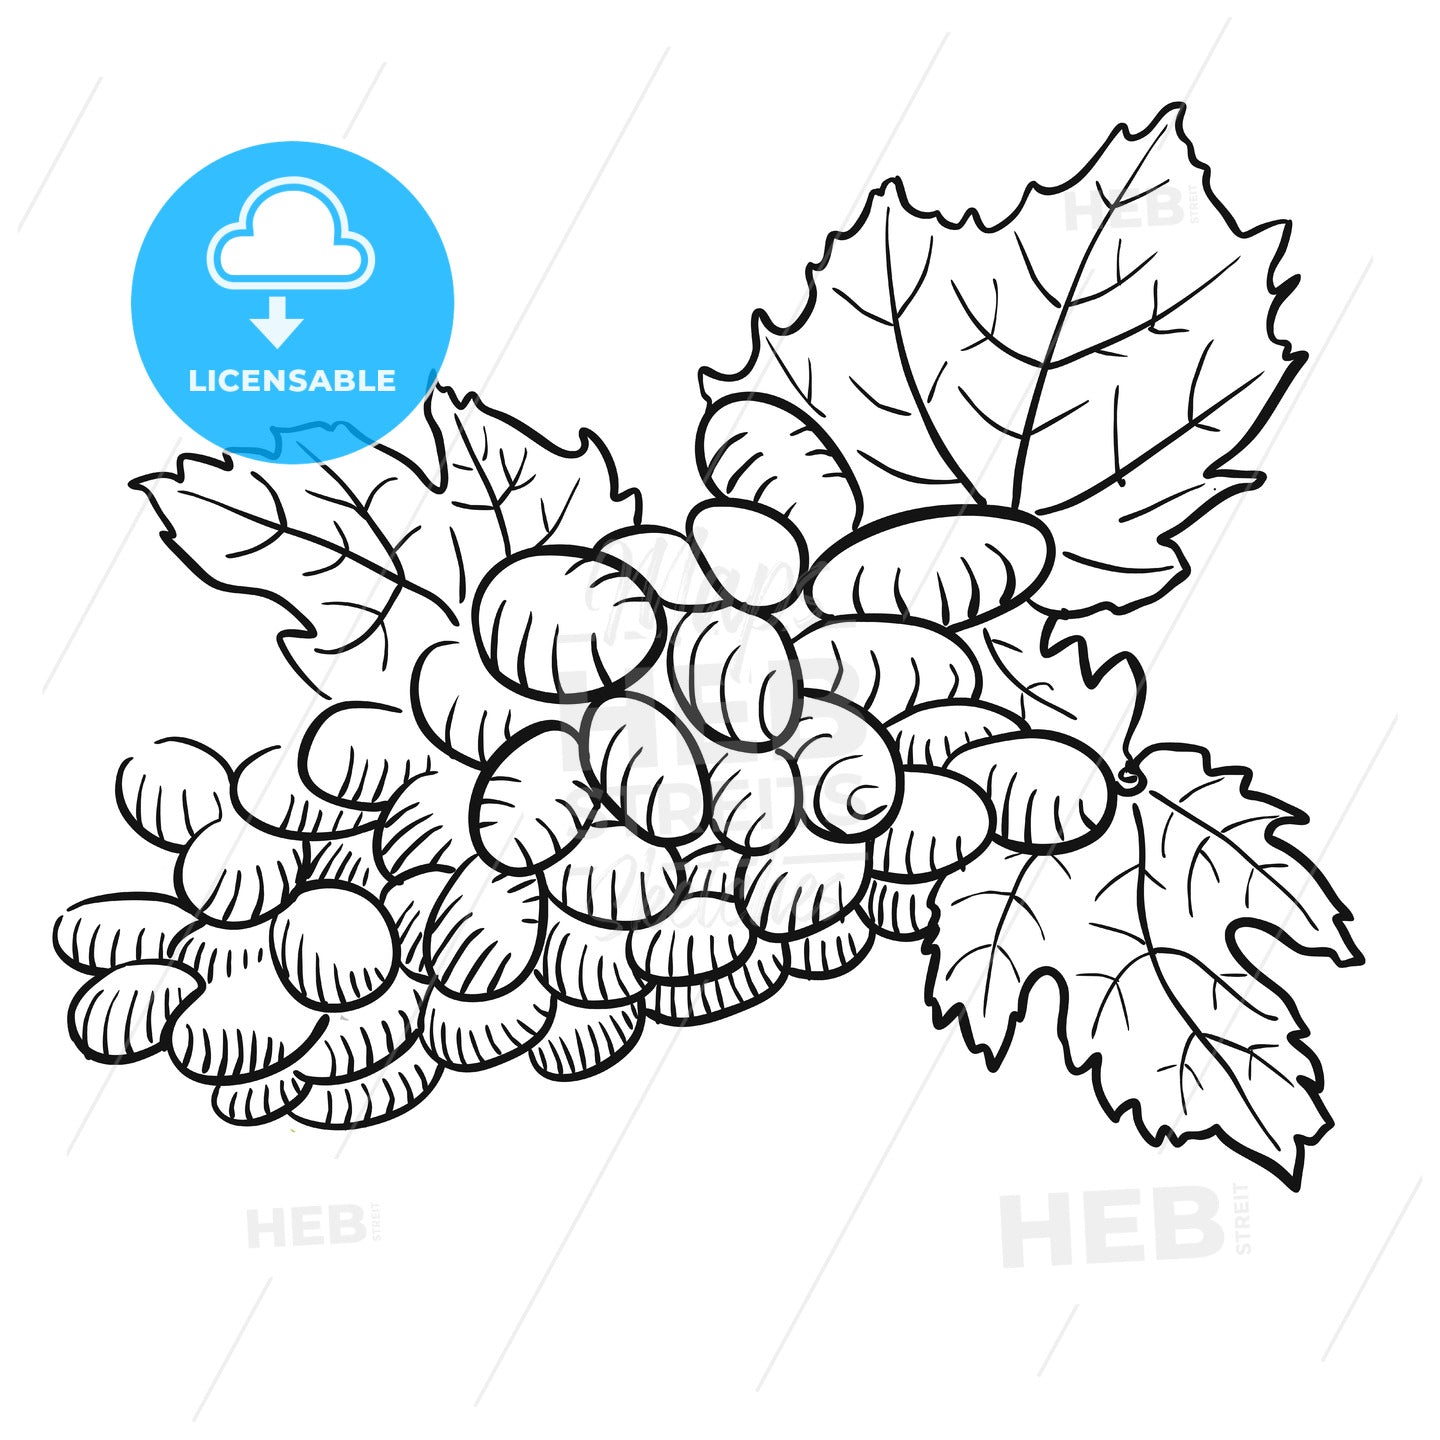 Sketched Grapes with Leaves, Black and White – instant download